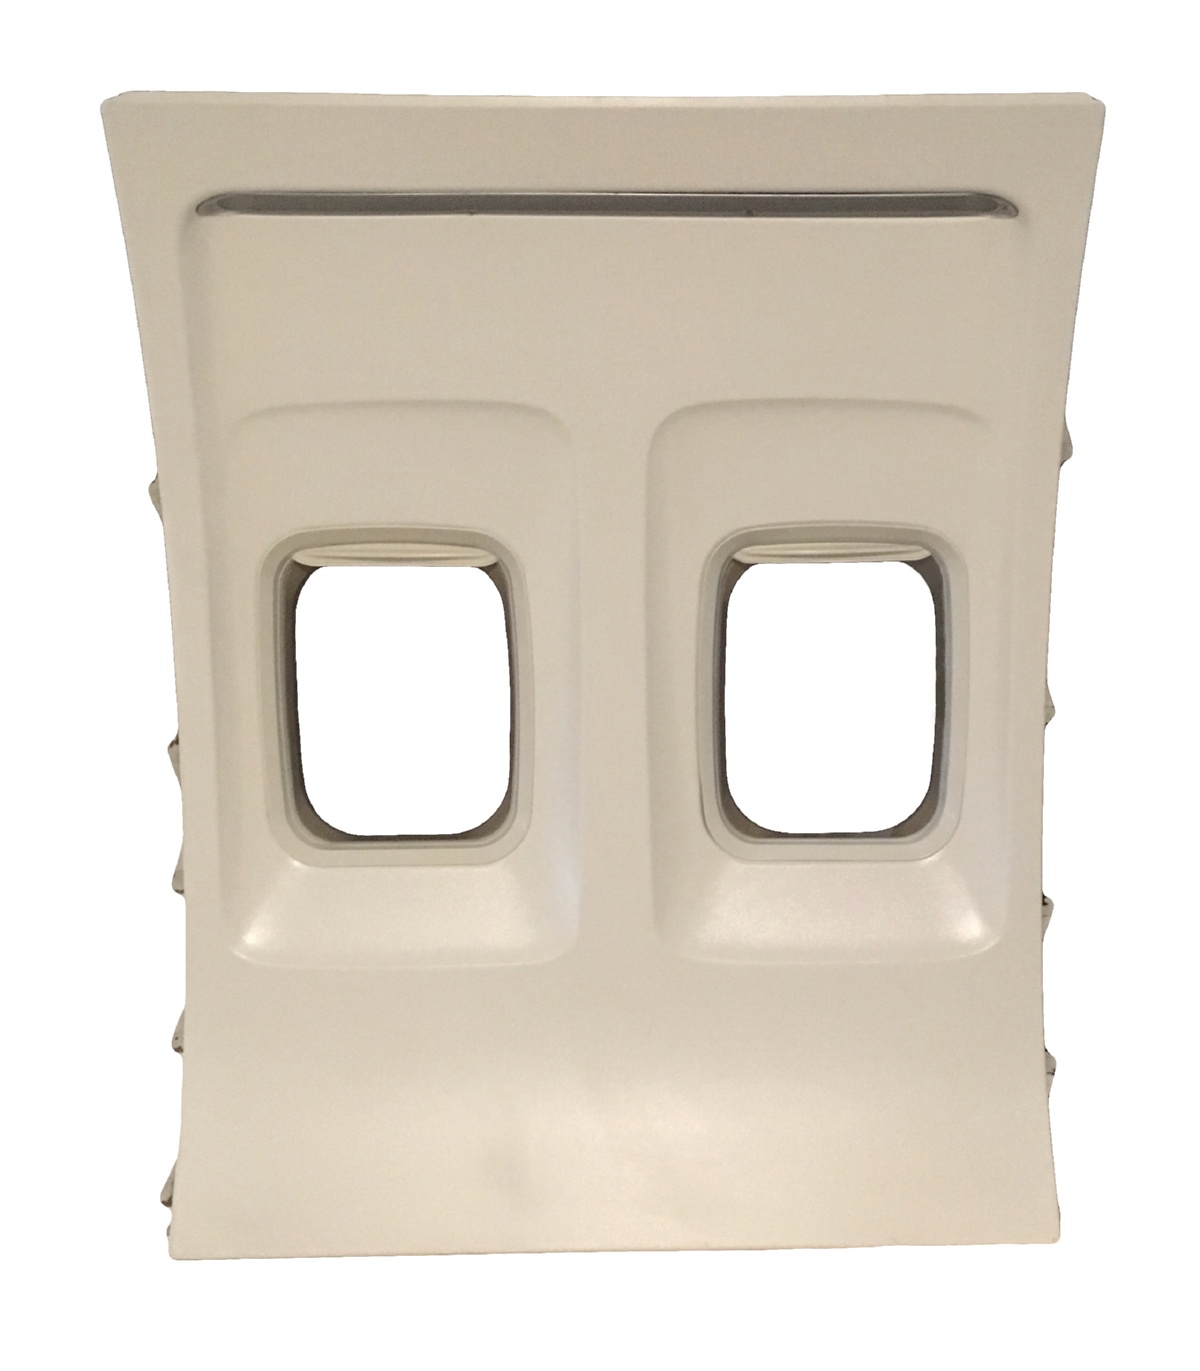 SWA 737 300 Cove Sidewall Panel Front